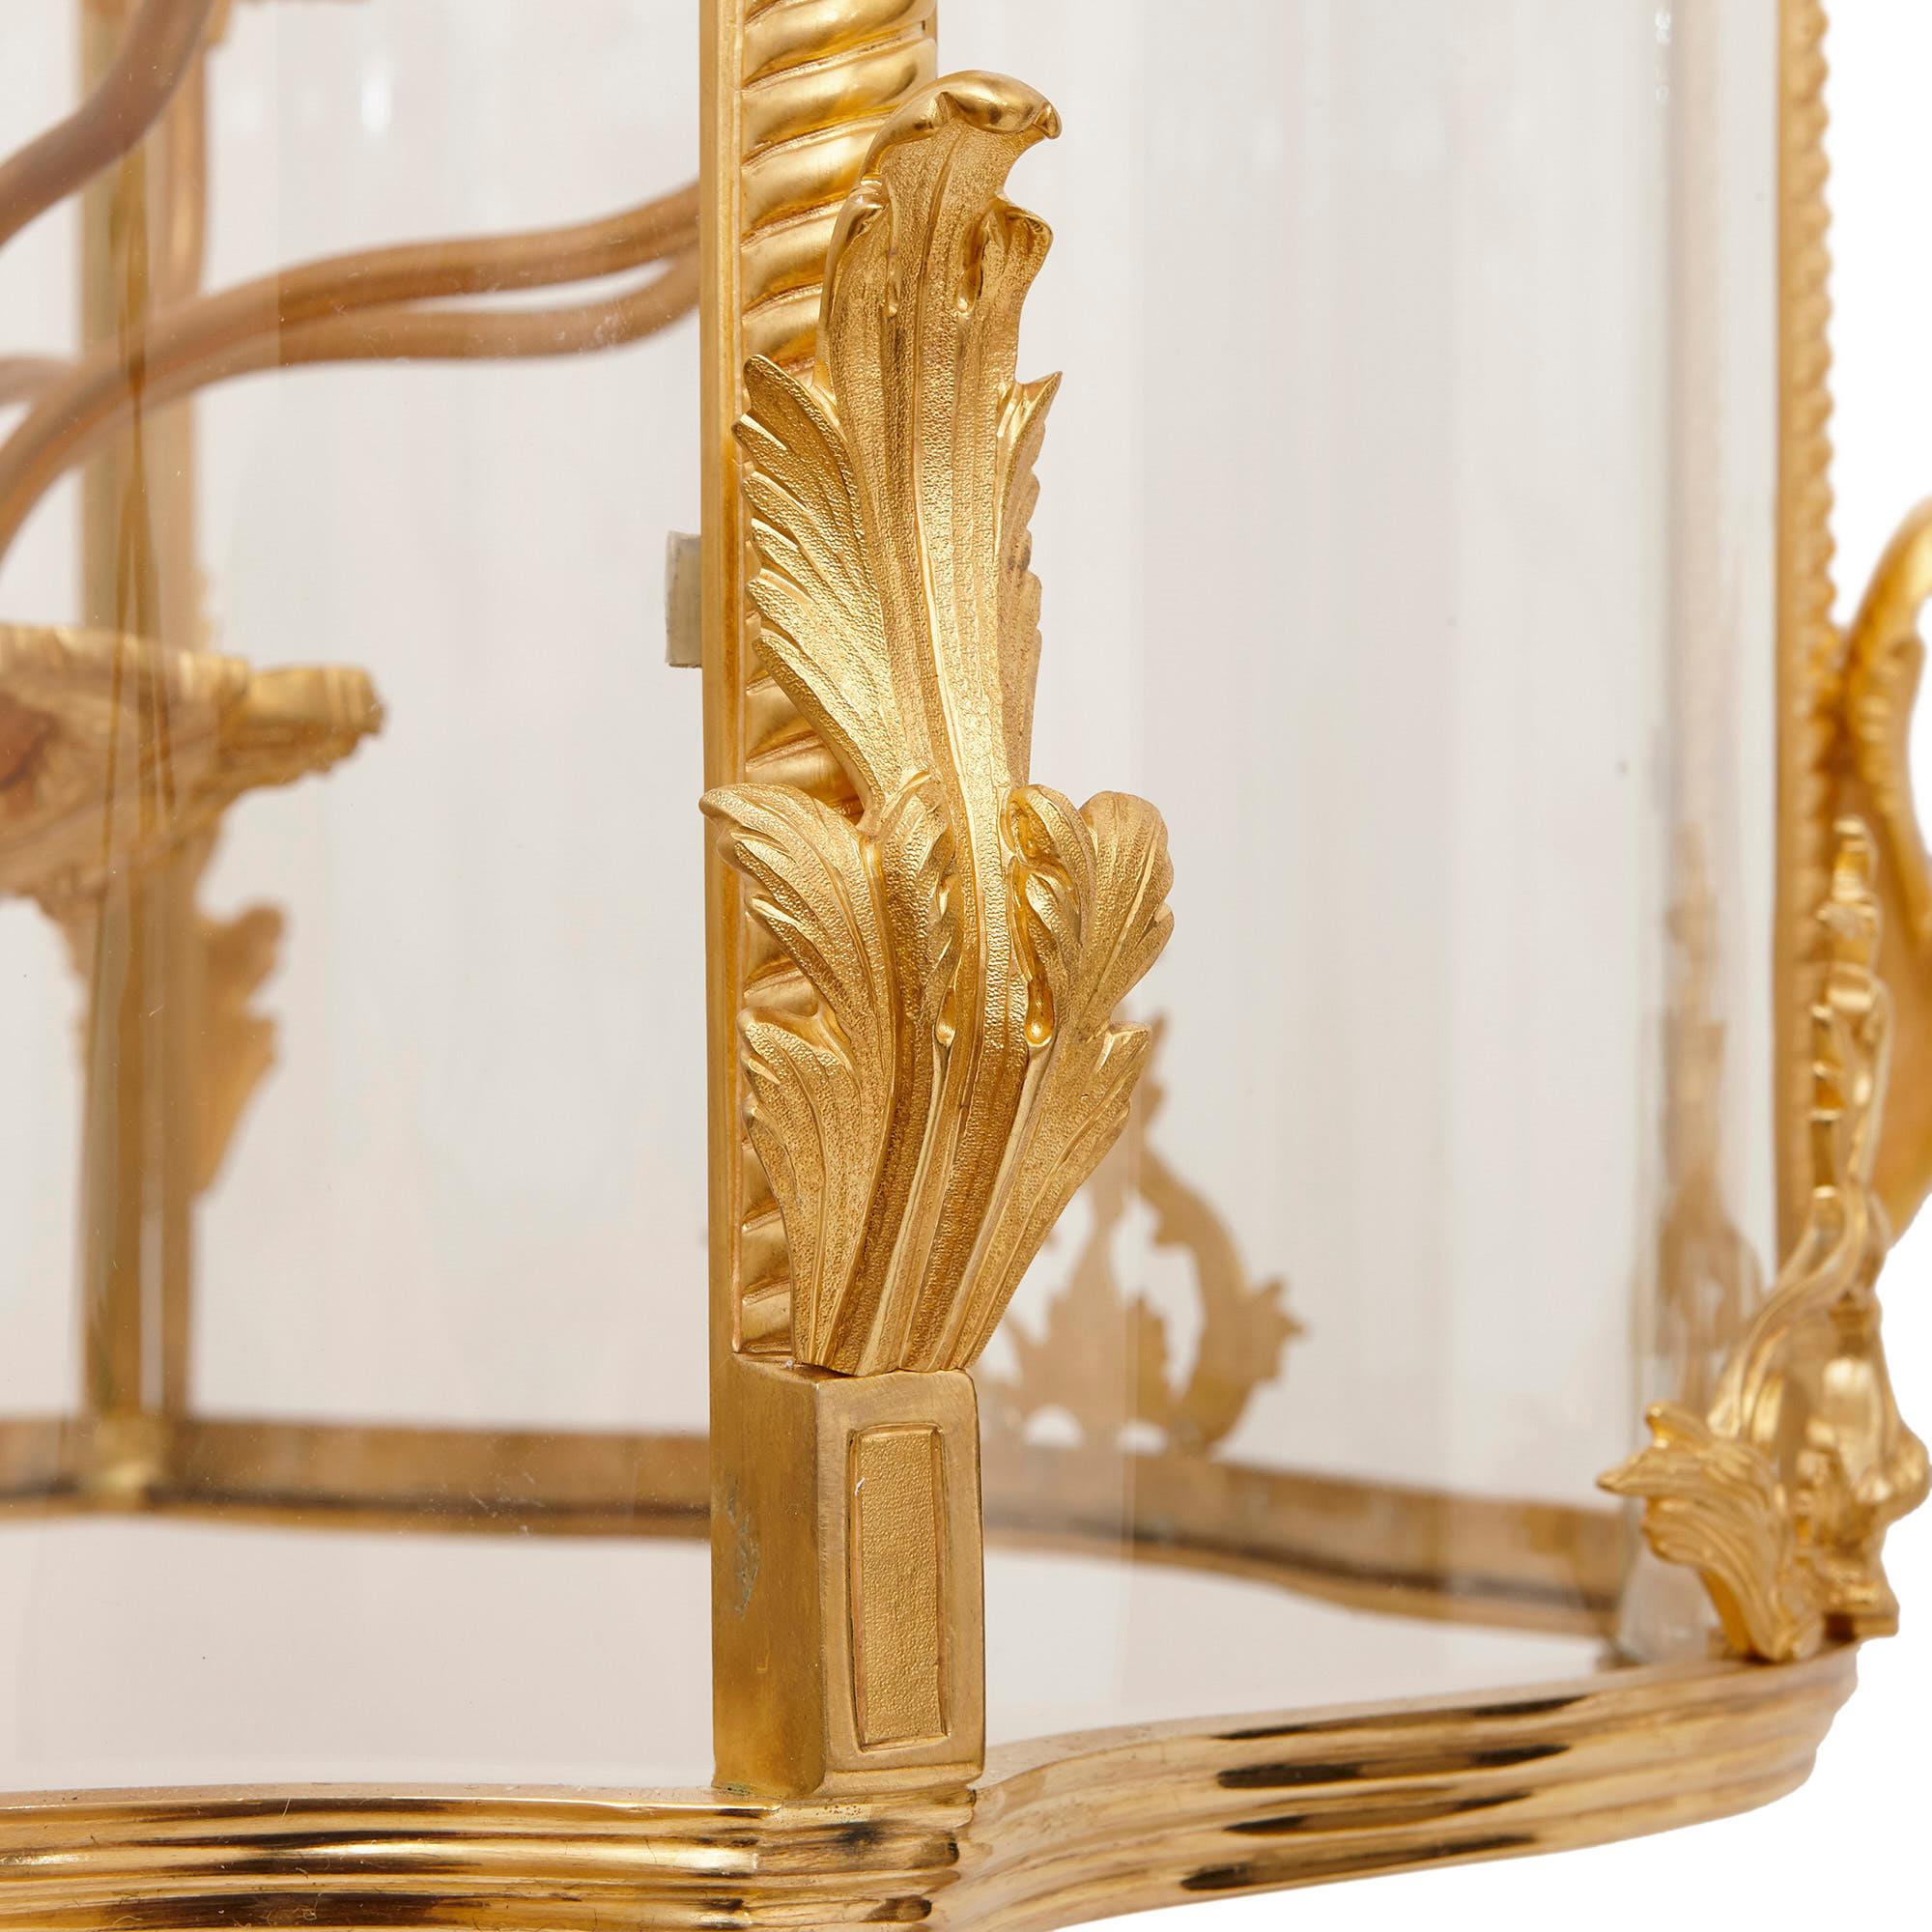 This hall lantern has been exquisitely crafted from glass and gilt bronze (ormolu). The piece will look wonderful placed in a grand entrance hall, living or dining room. The light it produces will reflect of its lustrous gold surfaces, causing the